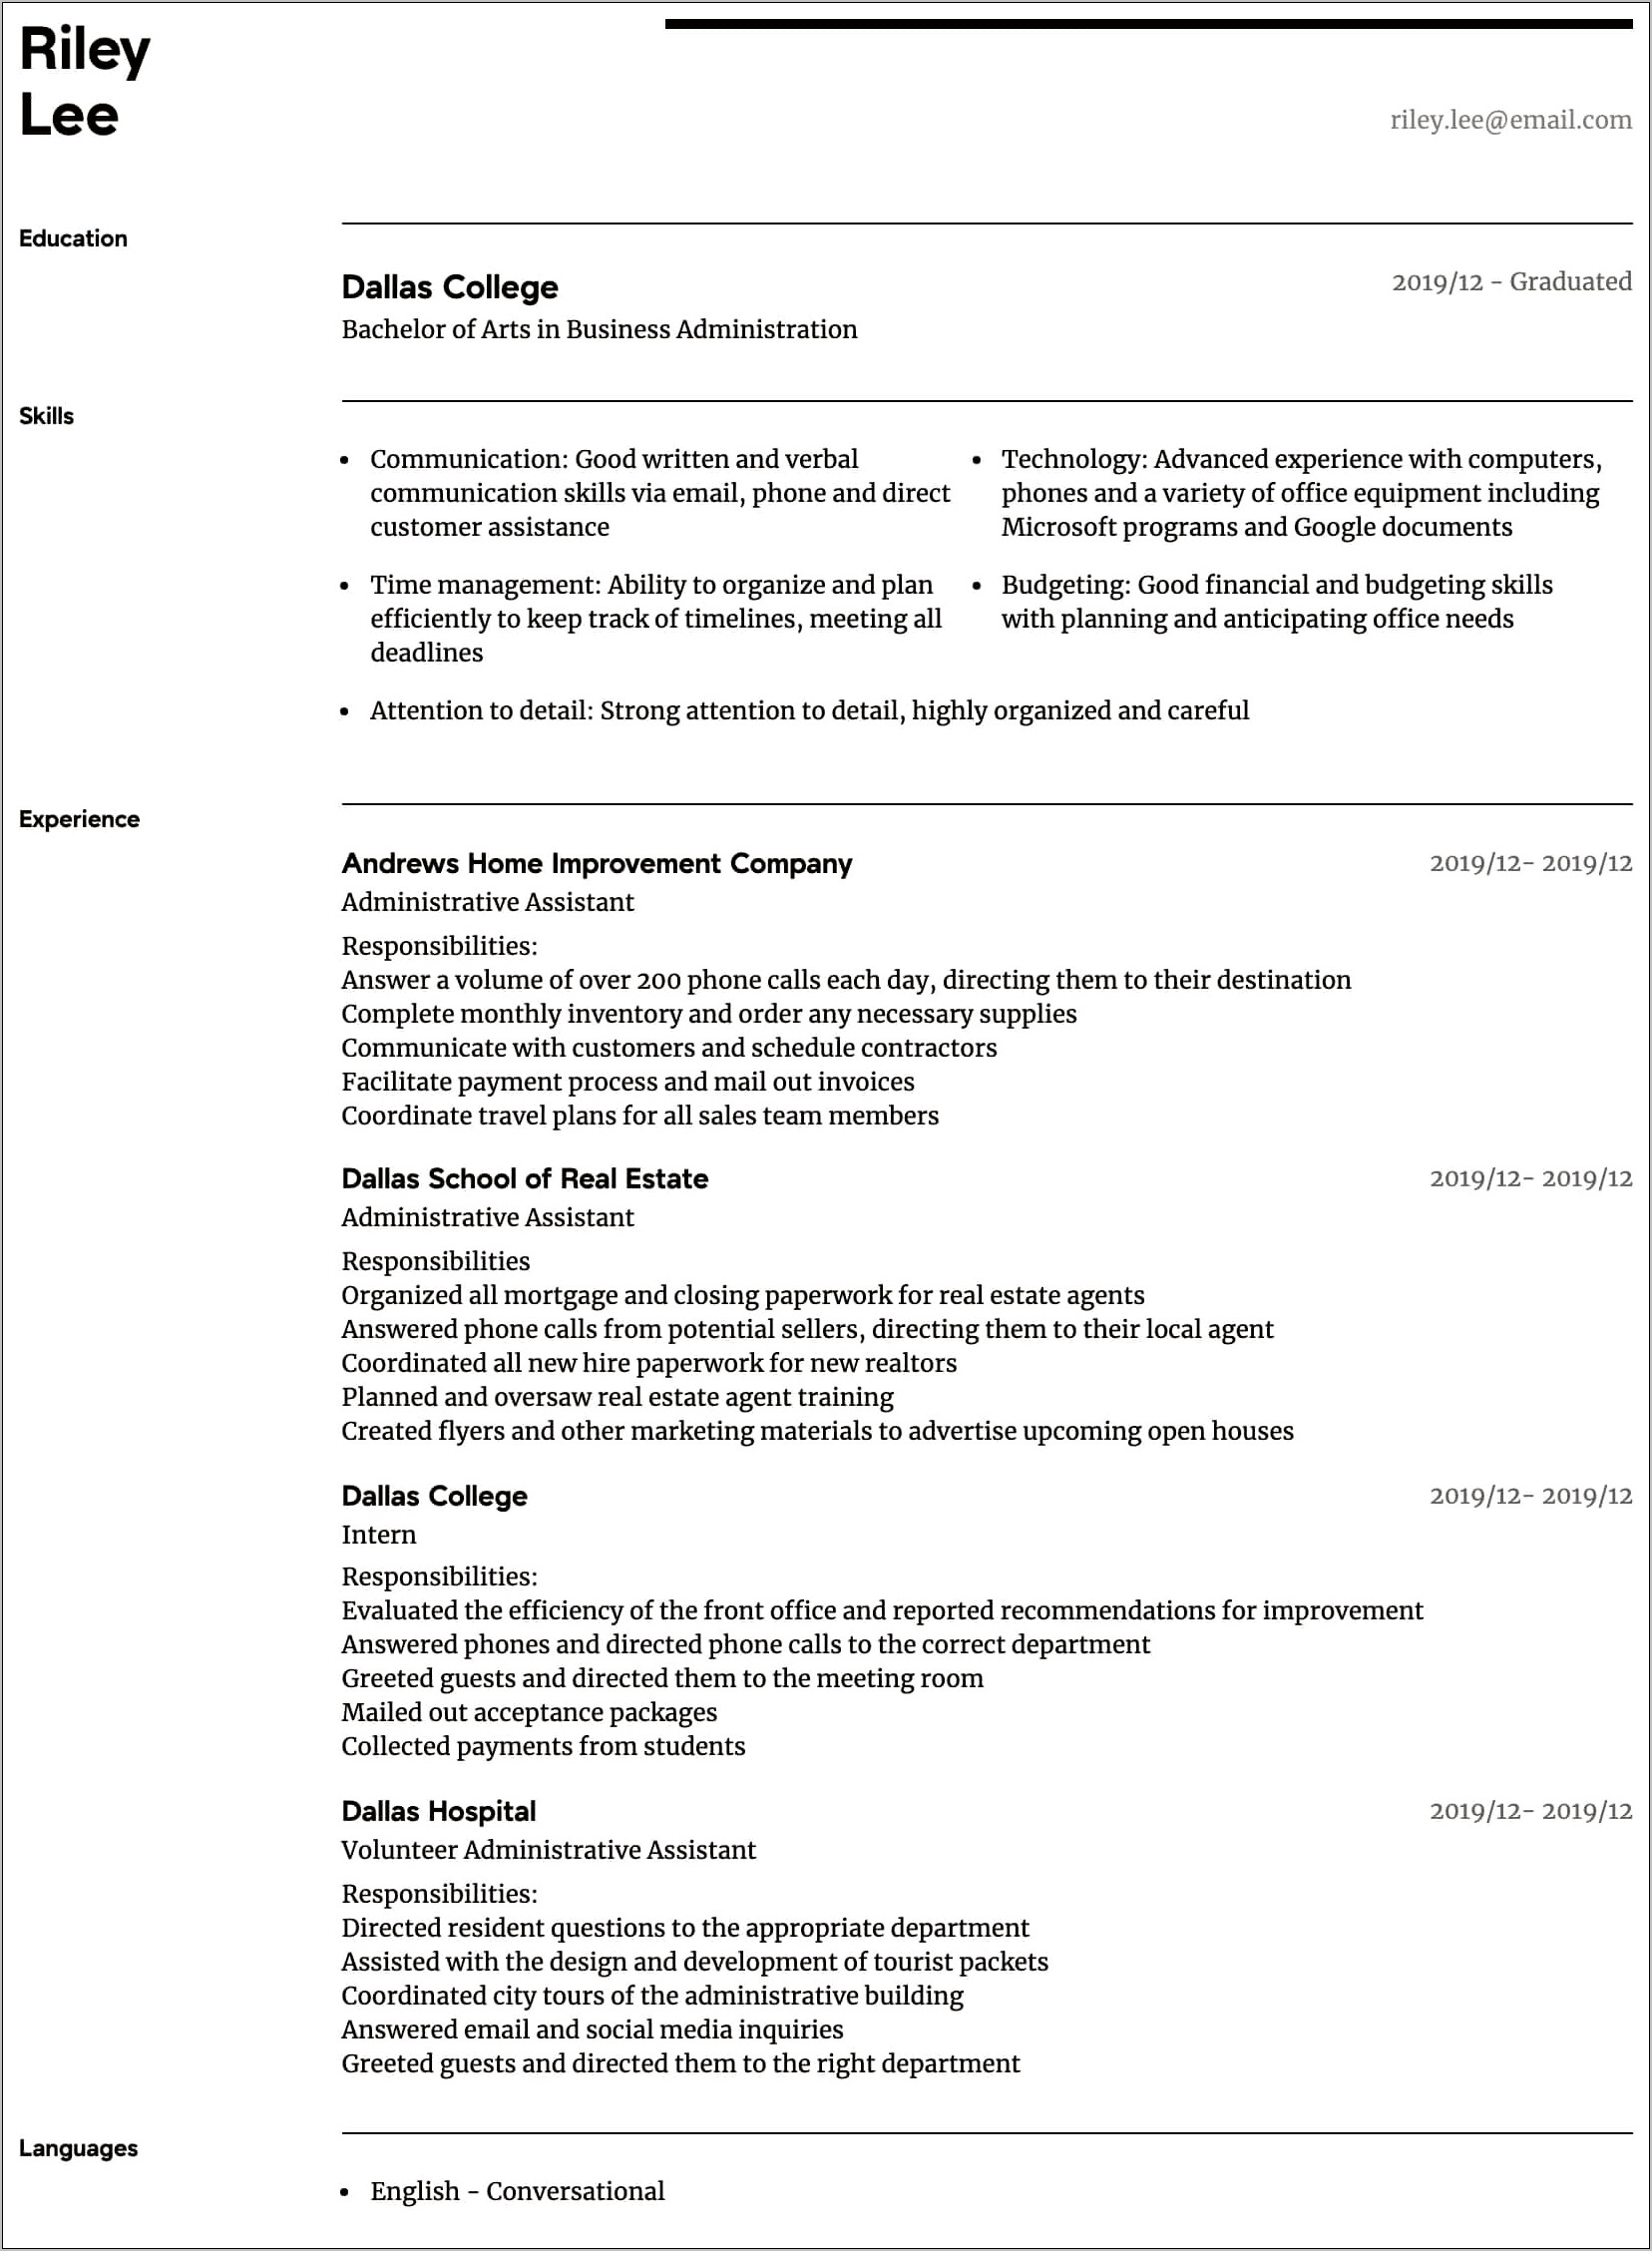 Skills To Put On Resume For Business Administration